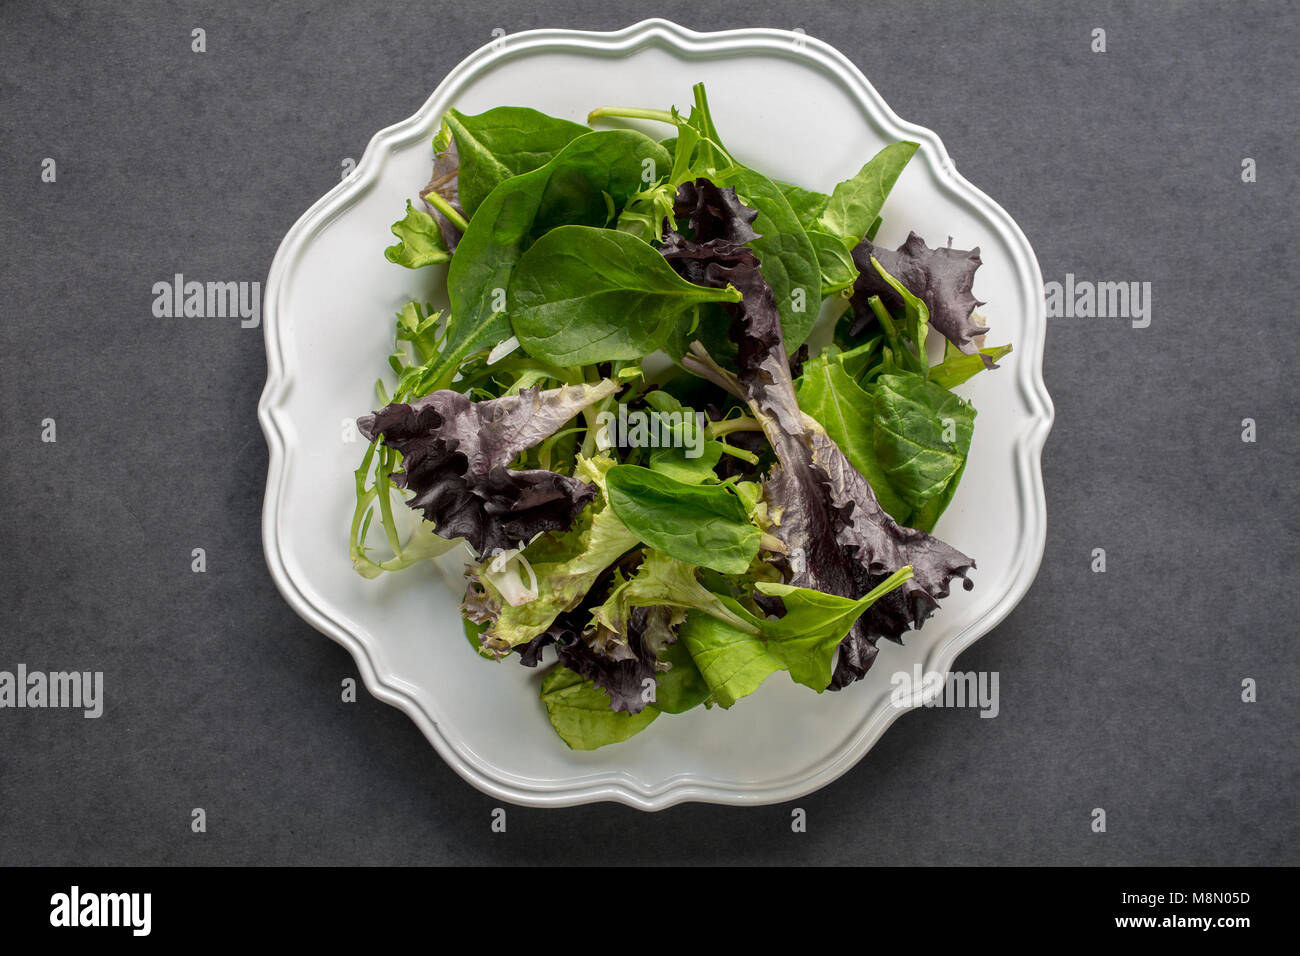 Unseasoned organic mixed greens salad in white plate bowl, on dark background, top view-diet food concept Stock Photo